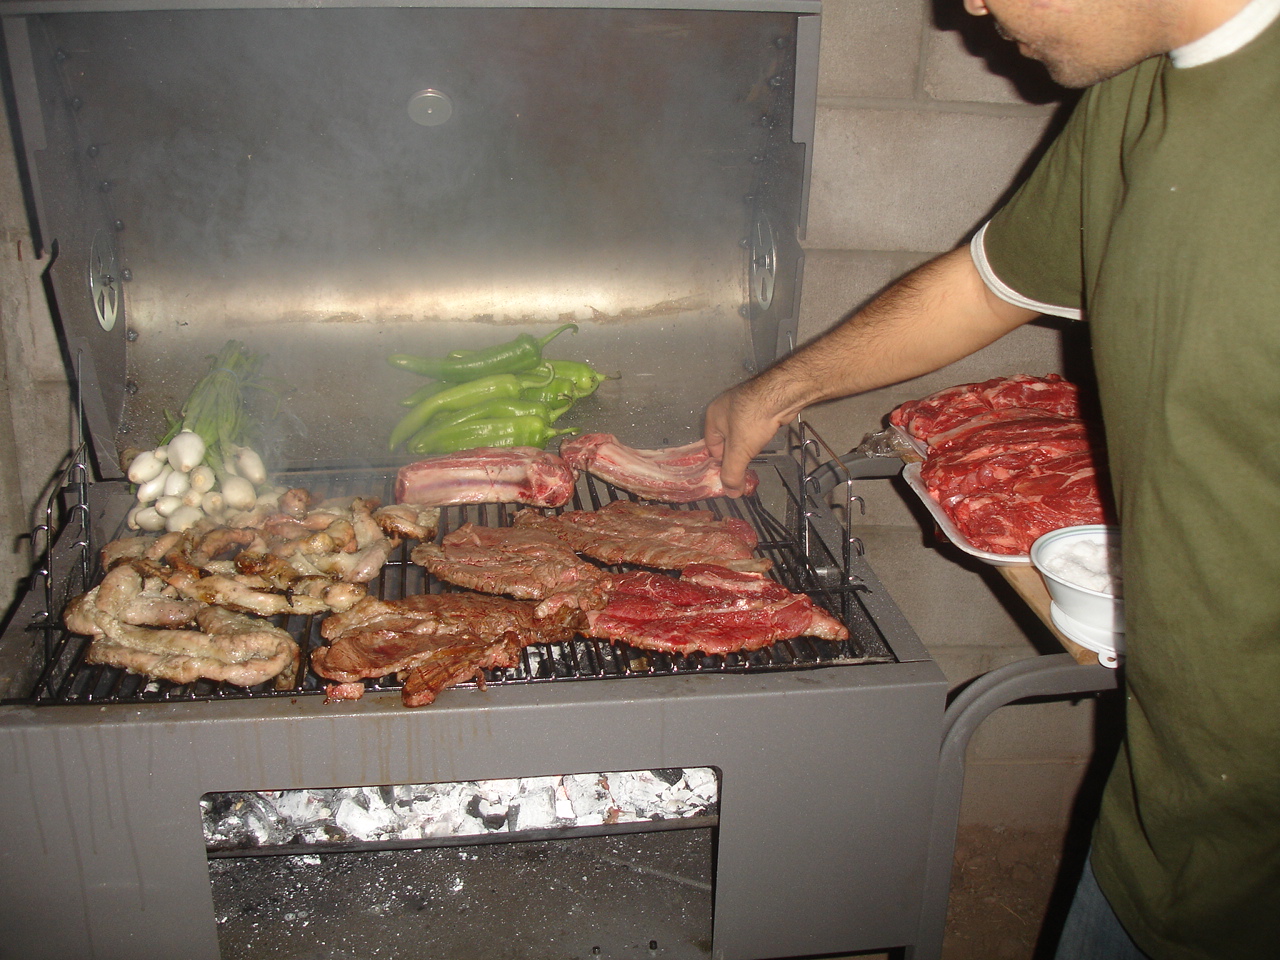 man cooking meats and other foods on a grill